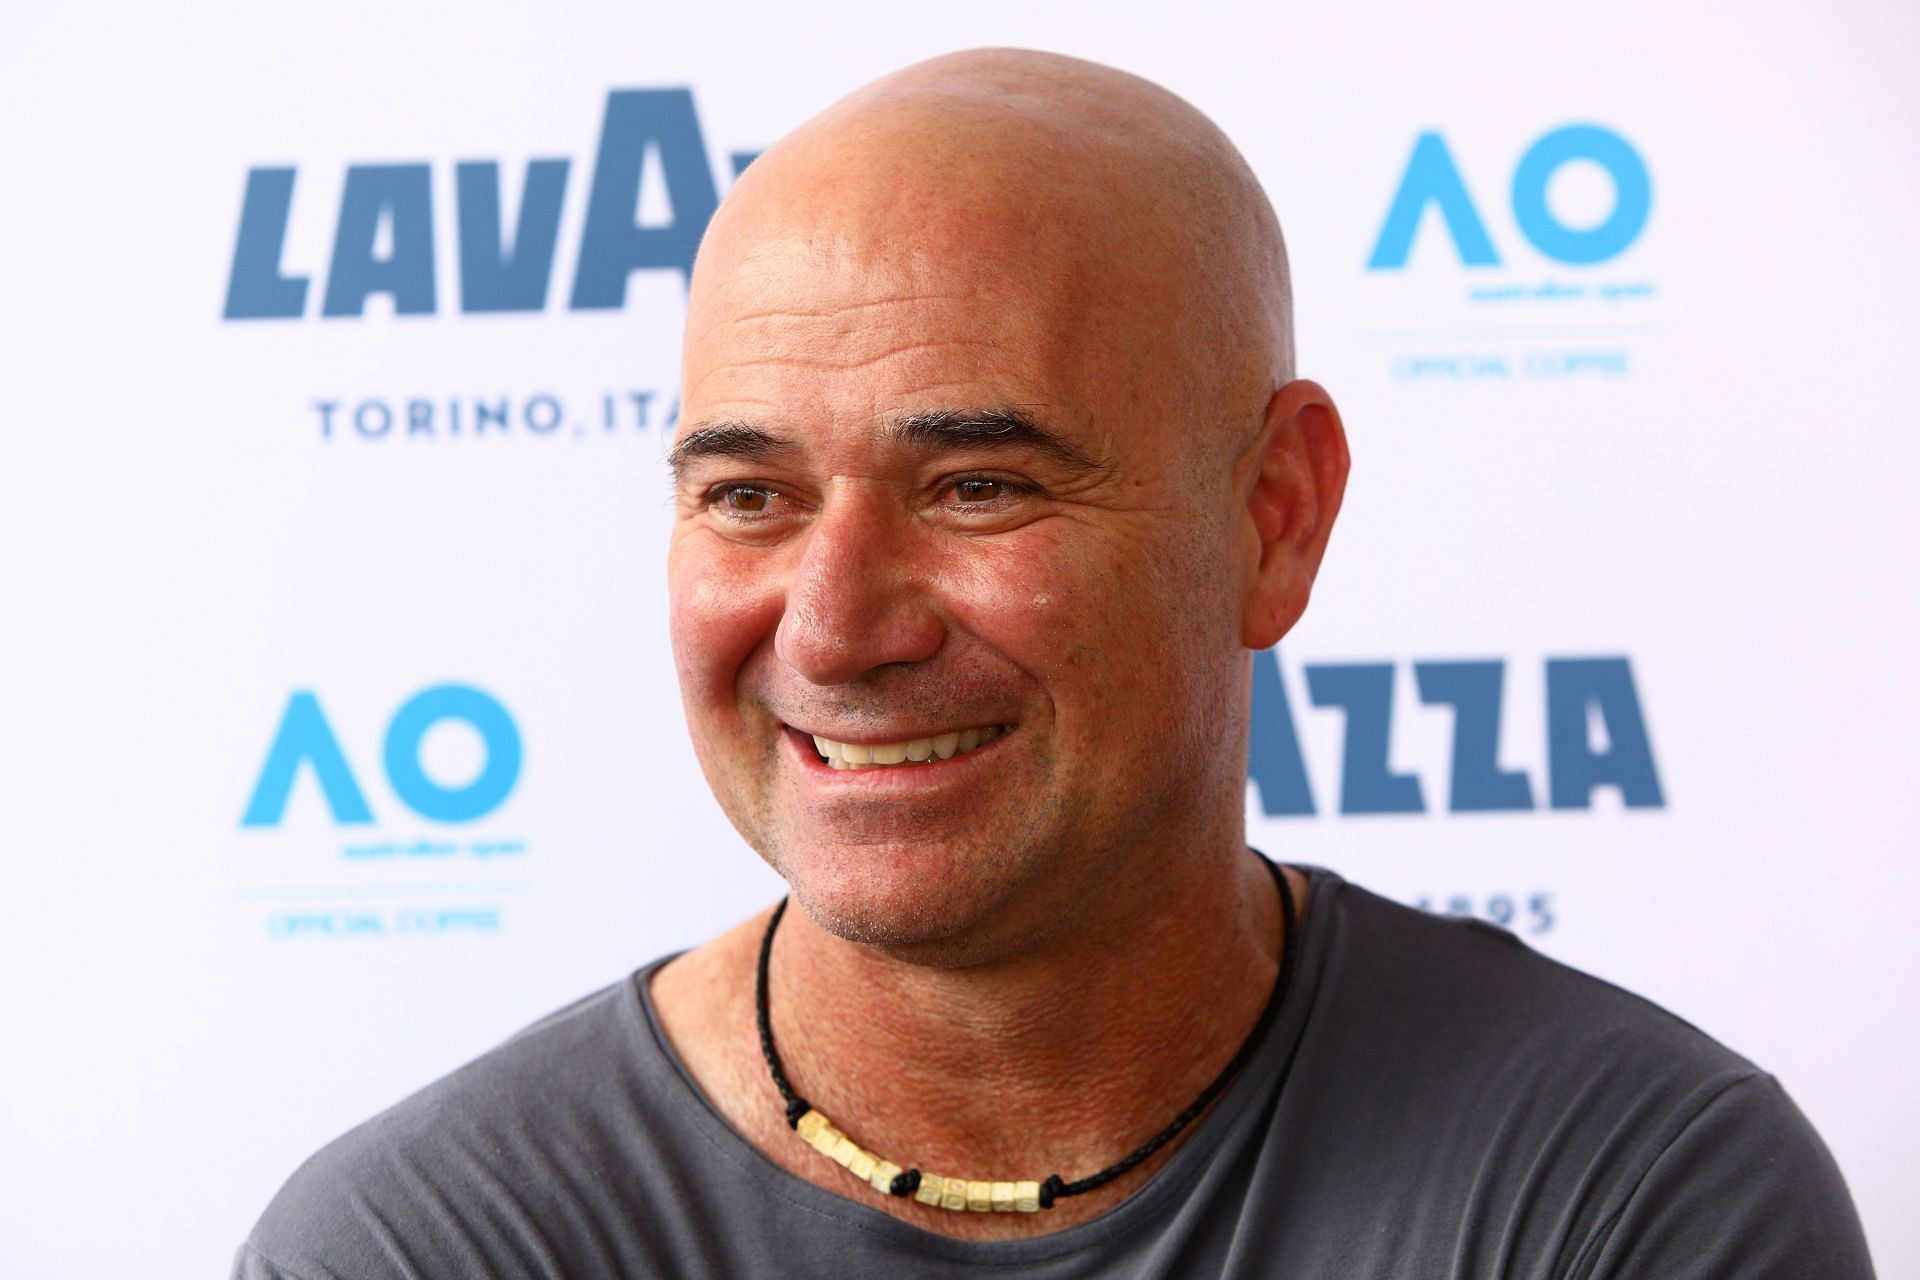 Agassi said that Steffi Graf inspired him in a lot of ways